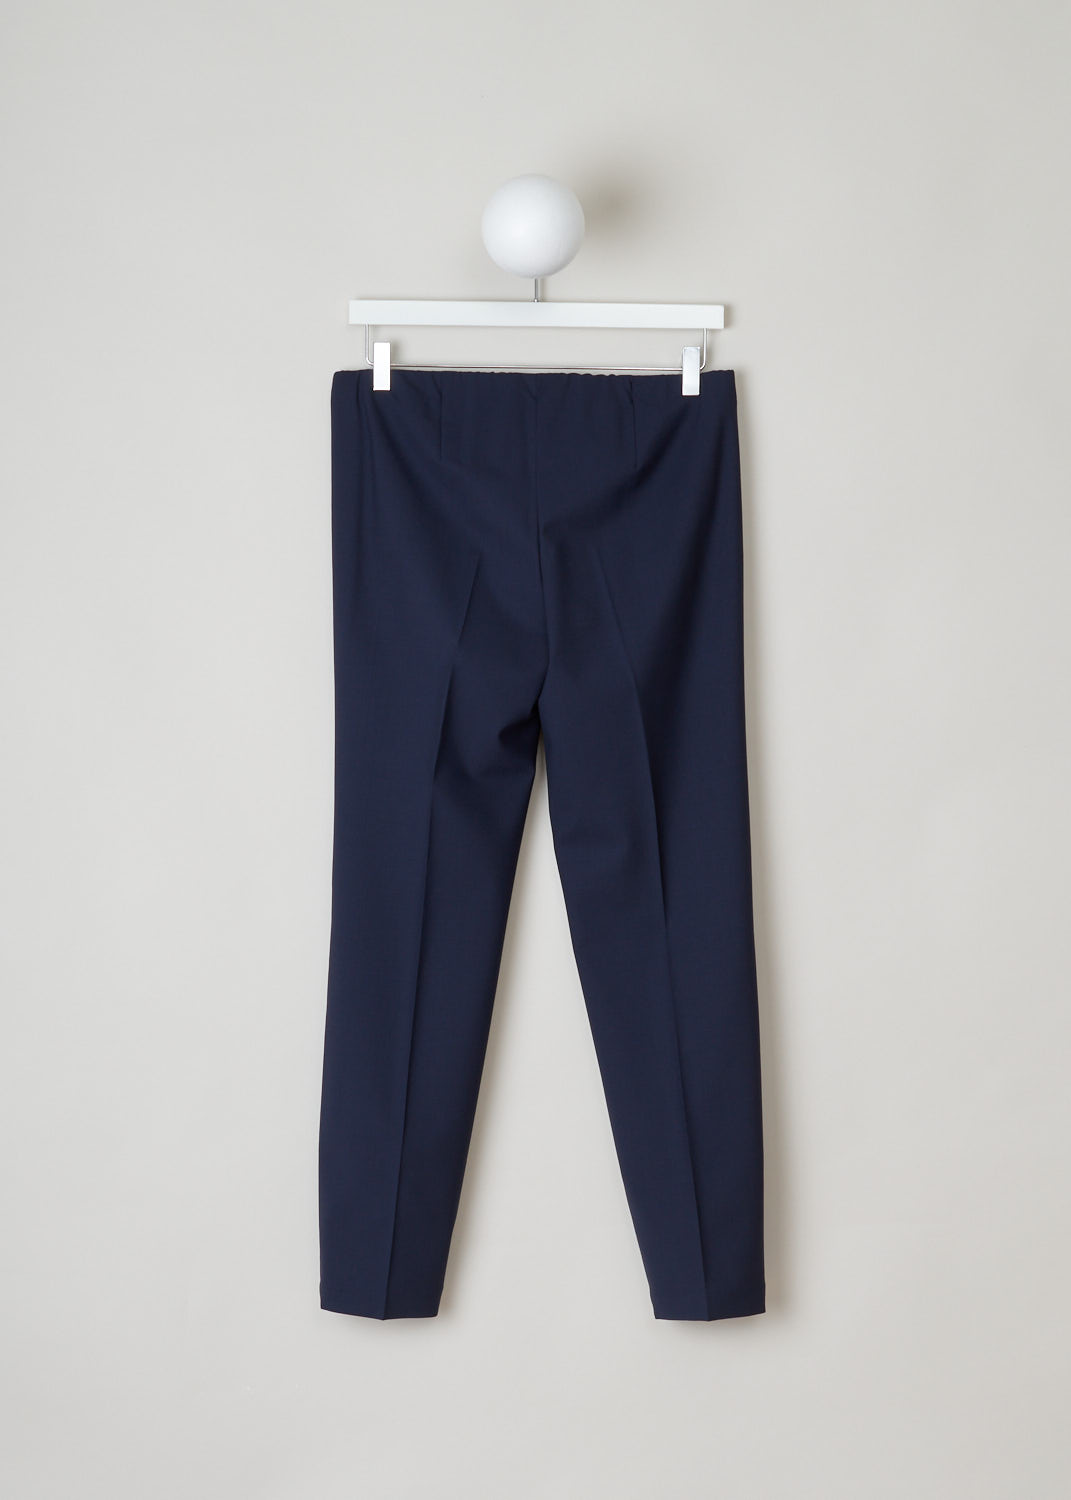 Brunello Cucinelli, straight midnight blue pants, M0W07P1794_C2831, blue, back, Empower your outfit with these minimalistic designed pants. Comes in a lightweight wool in midnight blue and charcoal grey. These low-cut pants have a slim fit and slightly tapered legs.
A concealed elasticated waistband and closes with an invisible zip on the side.